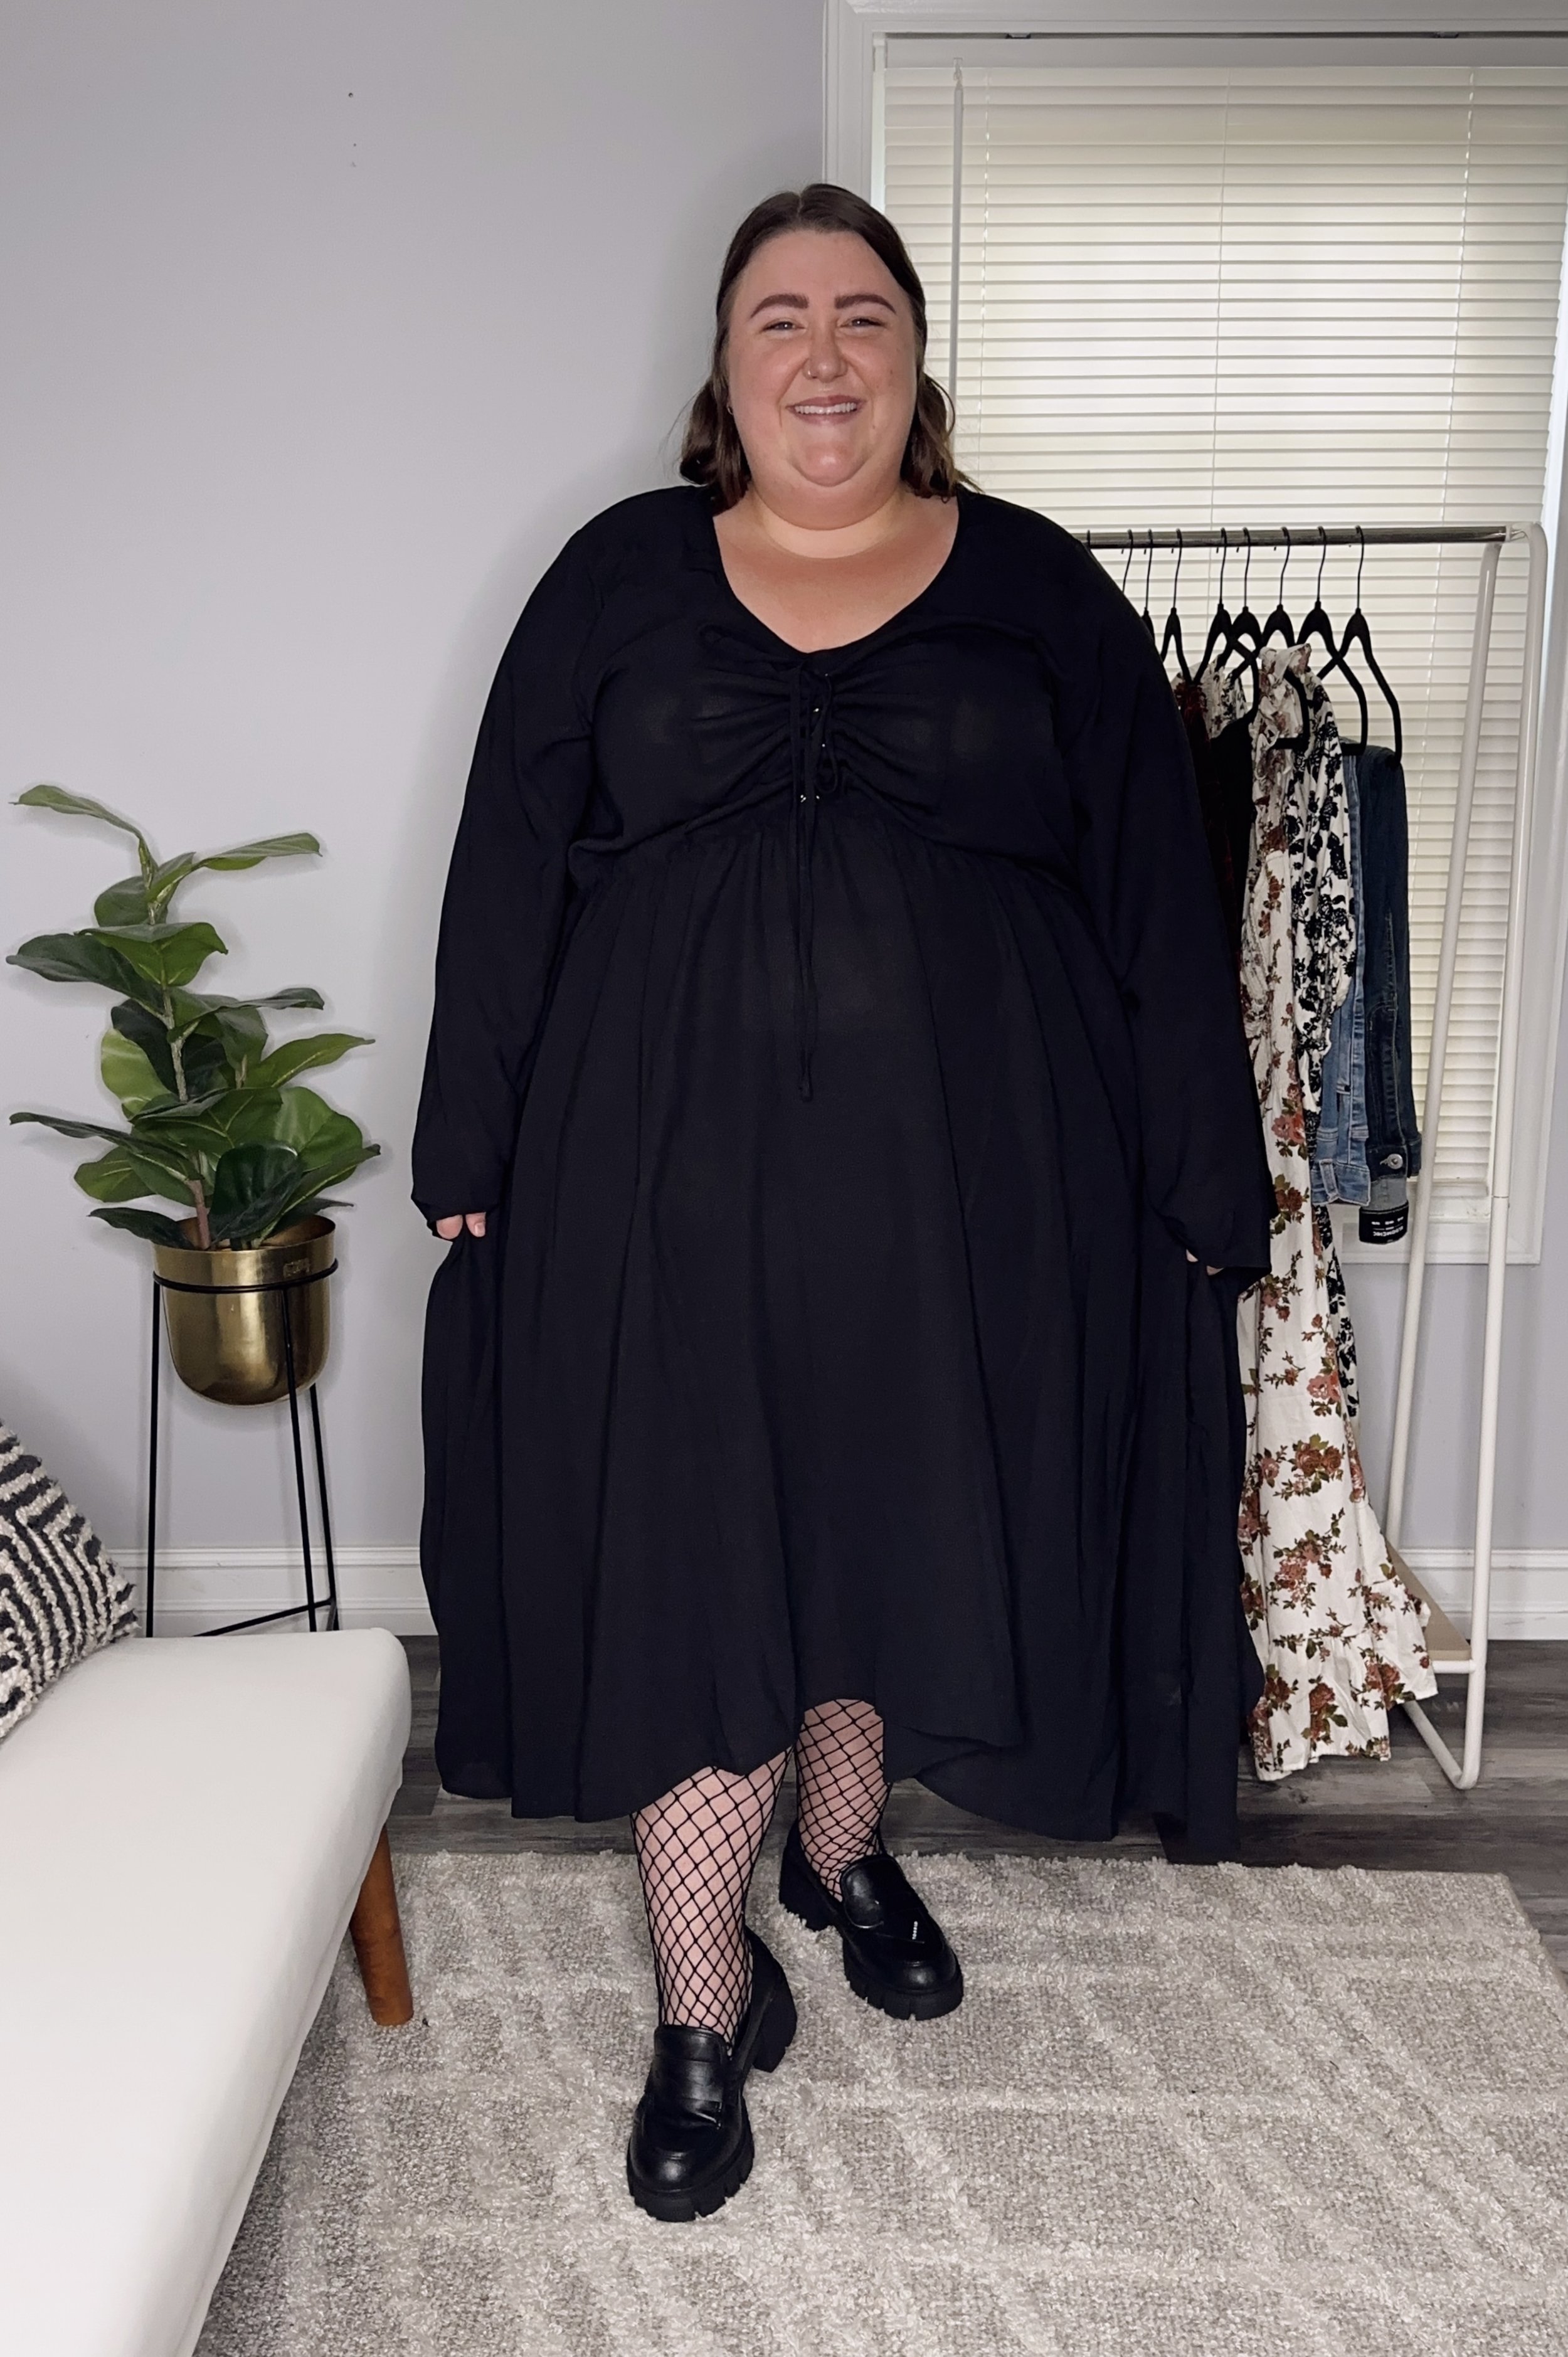 5 DAYS OF PLUS SIZE HALLOWEEN LOOKS — House of Dorough